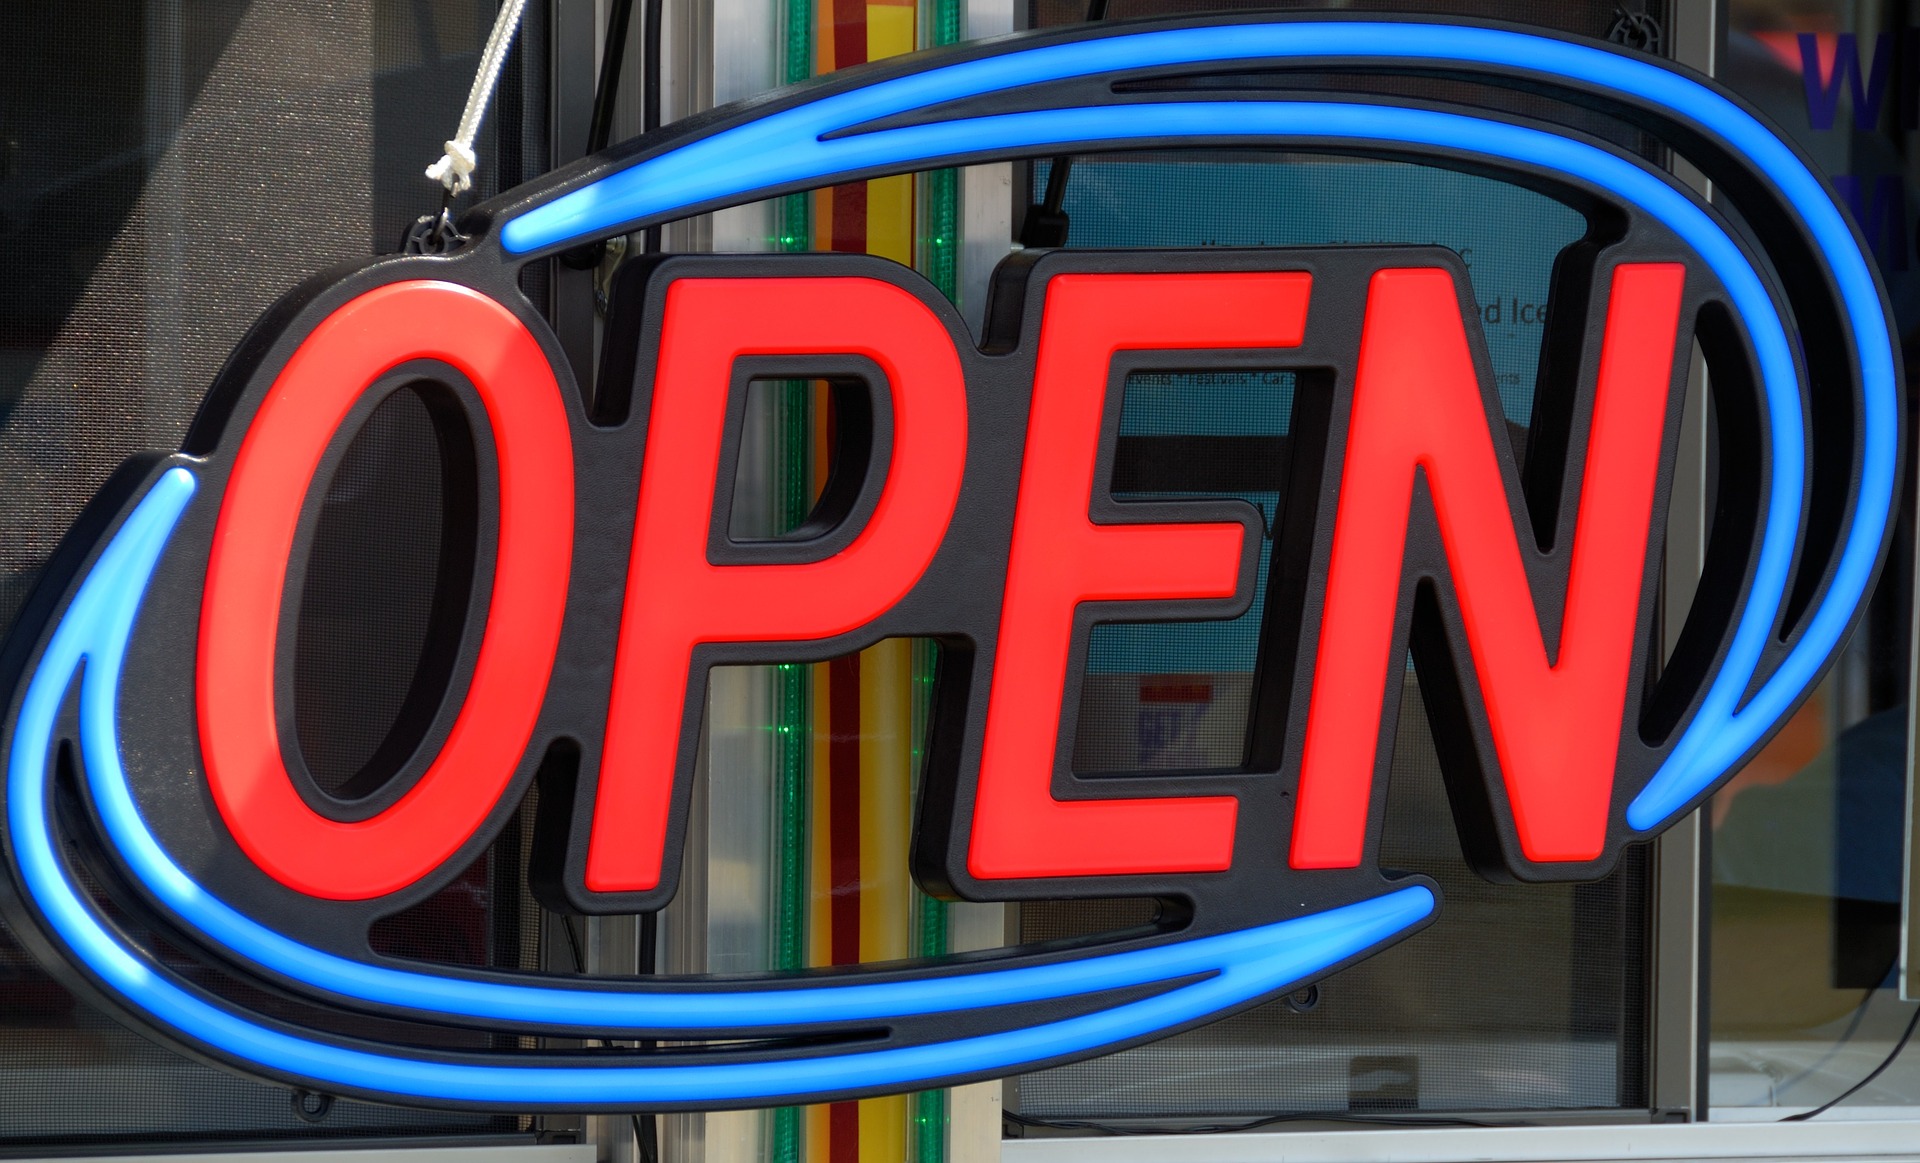 So, your business is now open? How are your in-store promotional displays doing with consumer experience?